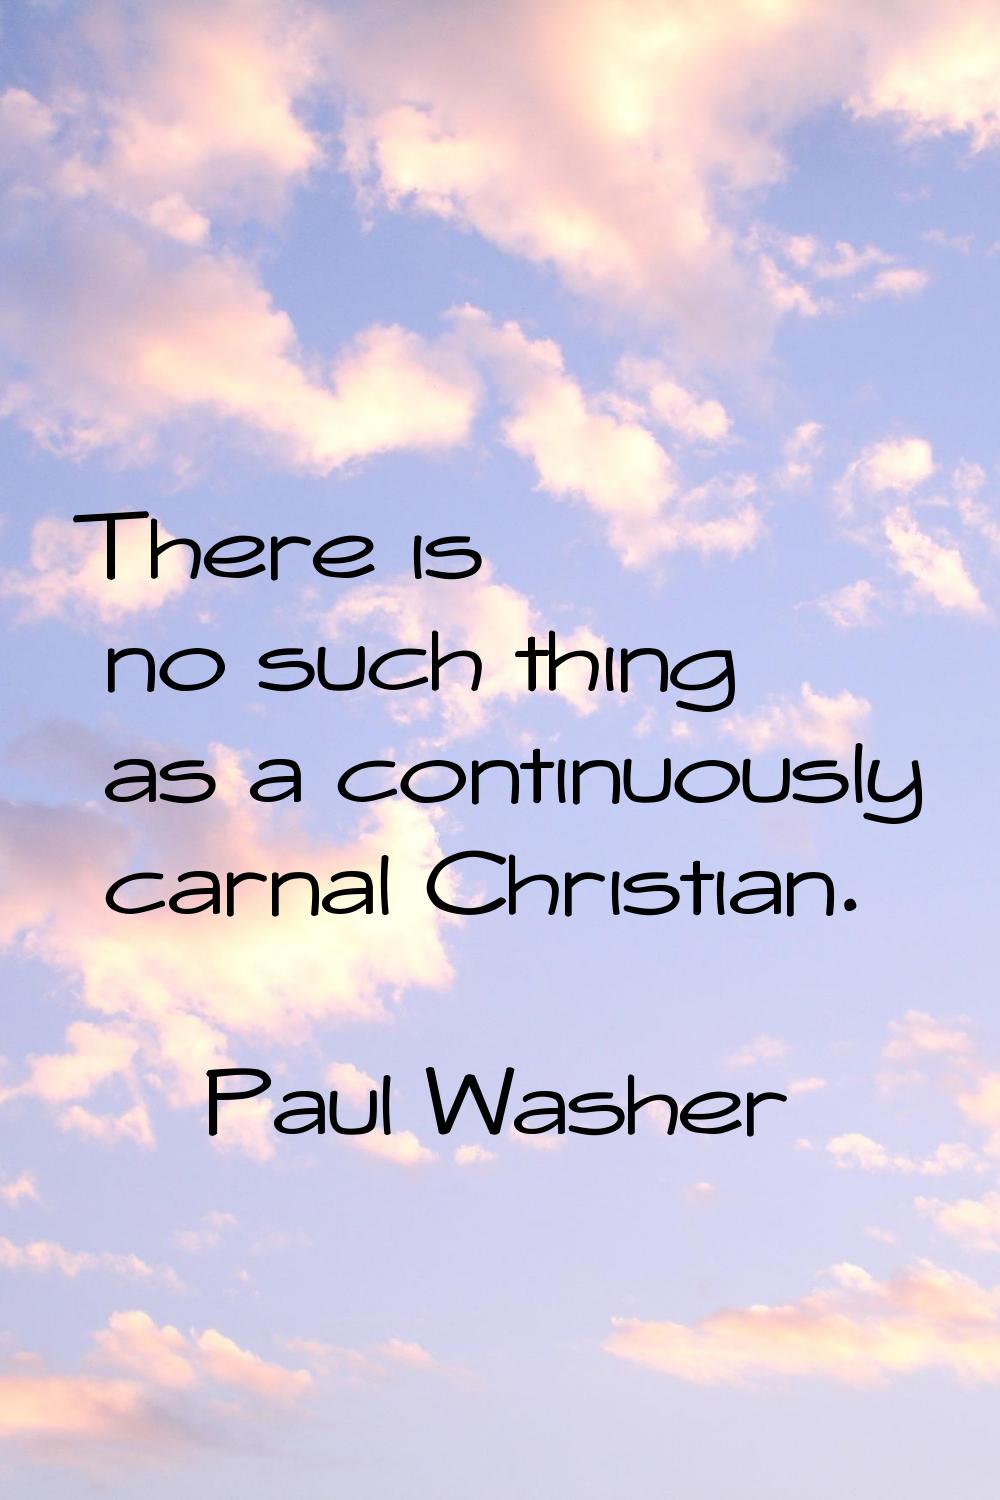 There is no such thing as a continuously carnal Christian.